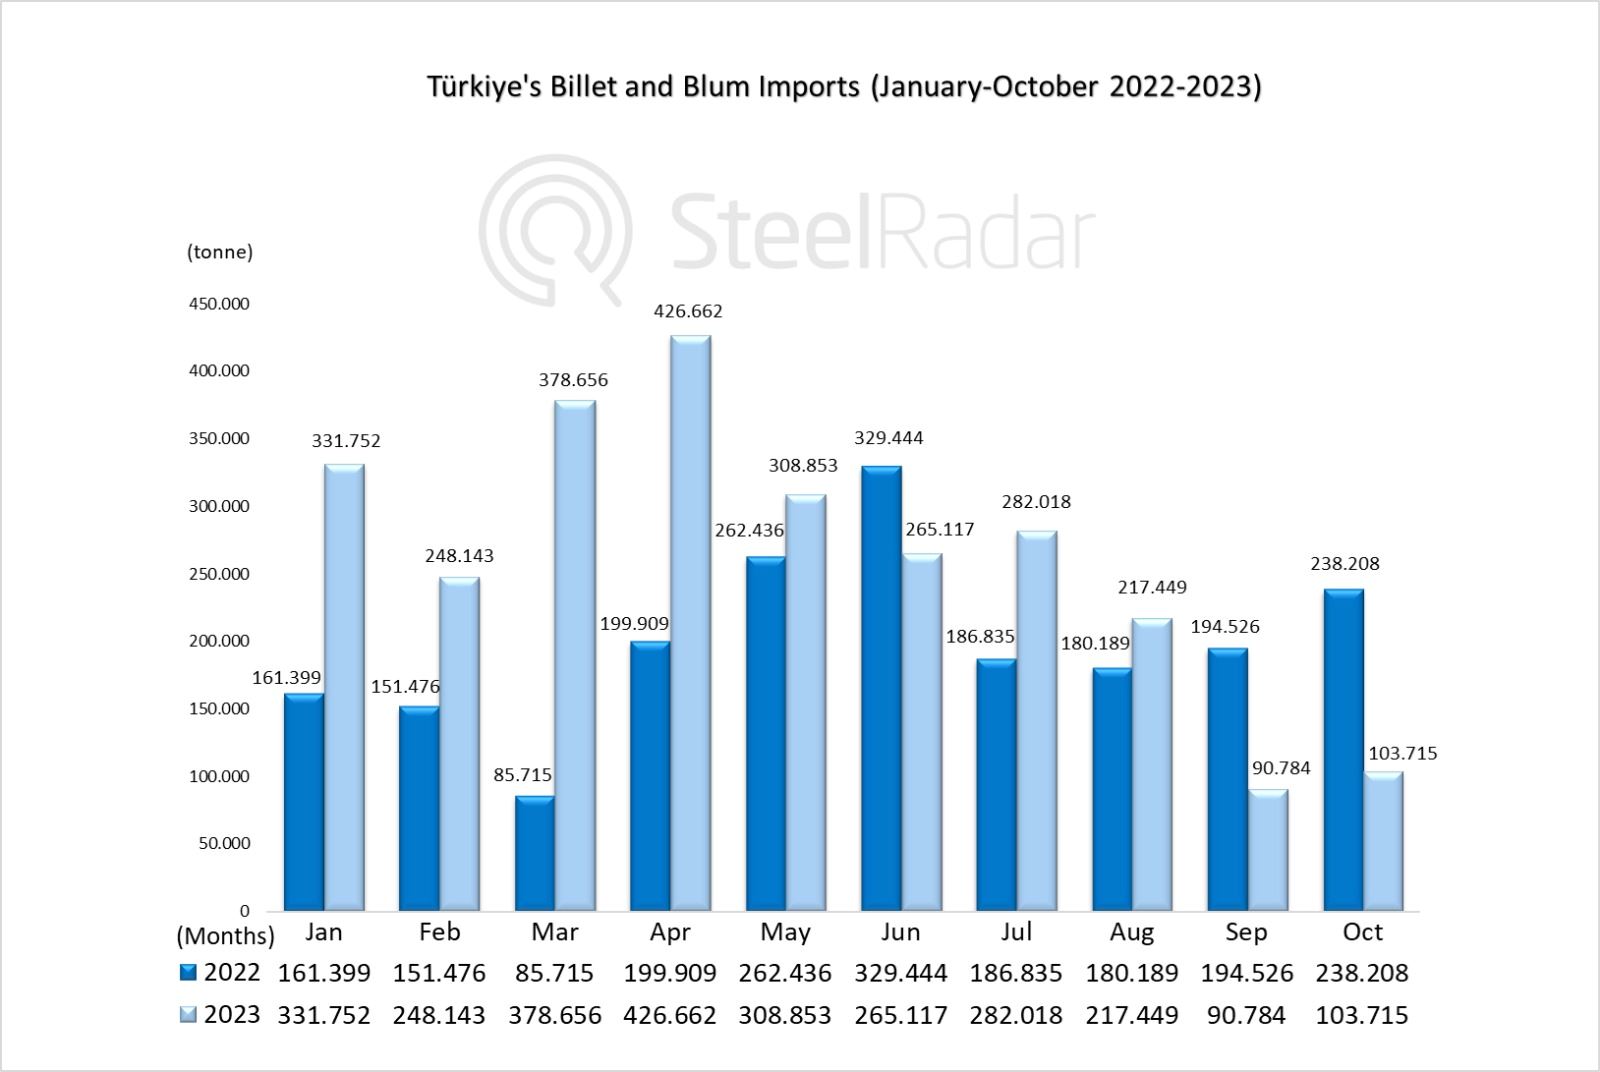 Imports of Türkiye's billet and bloom decreased on a monthly basis but increased on an annual basis